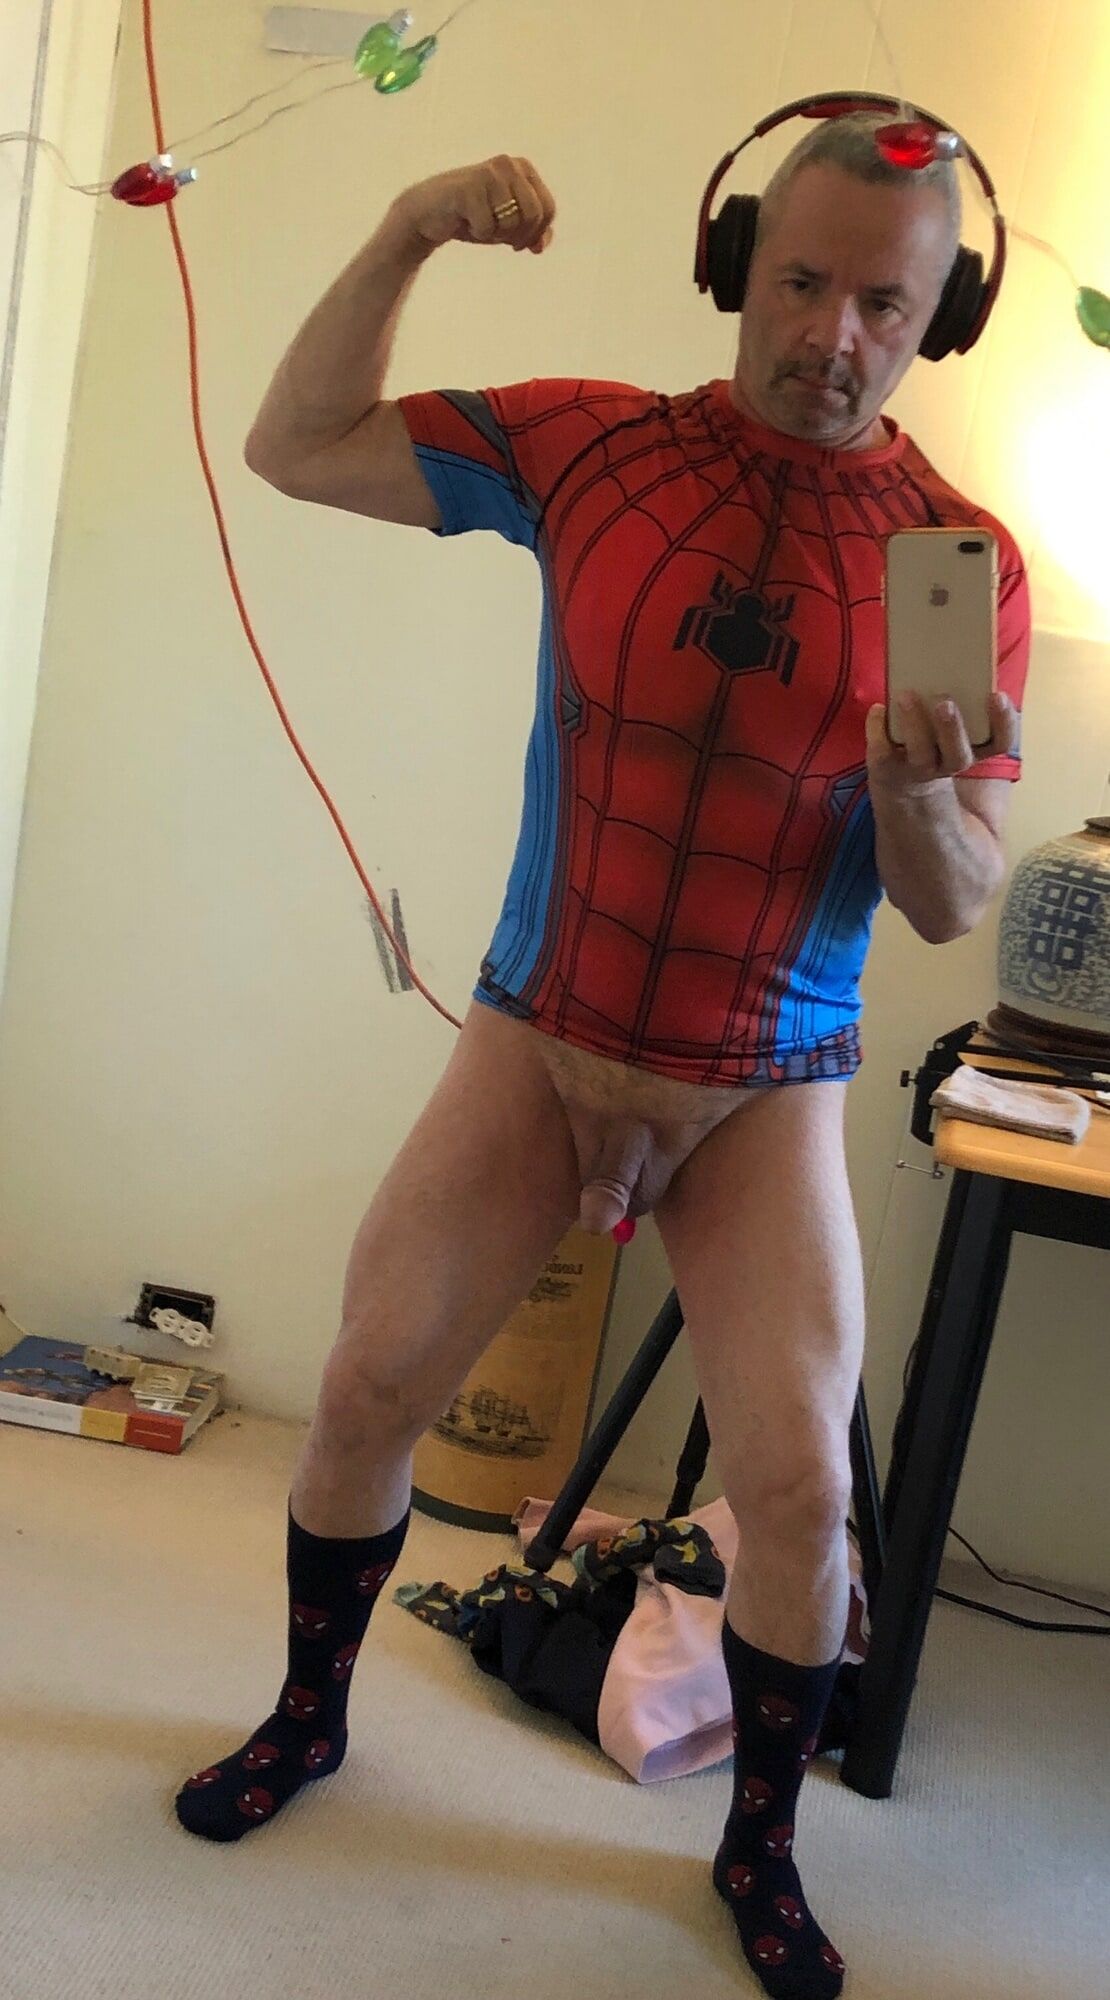 Costume-Halloween Is Coming! No Costume For My Dick! LOL #2